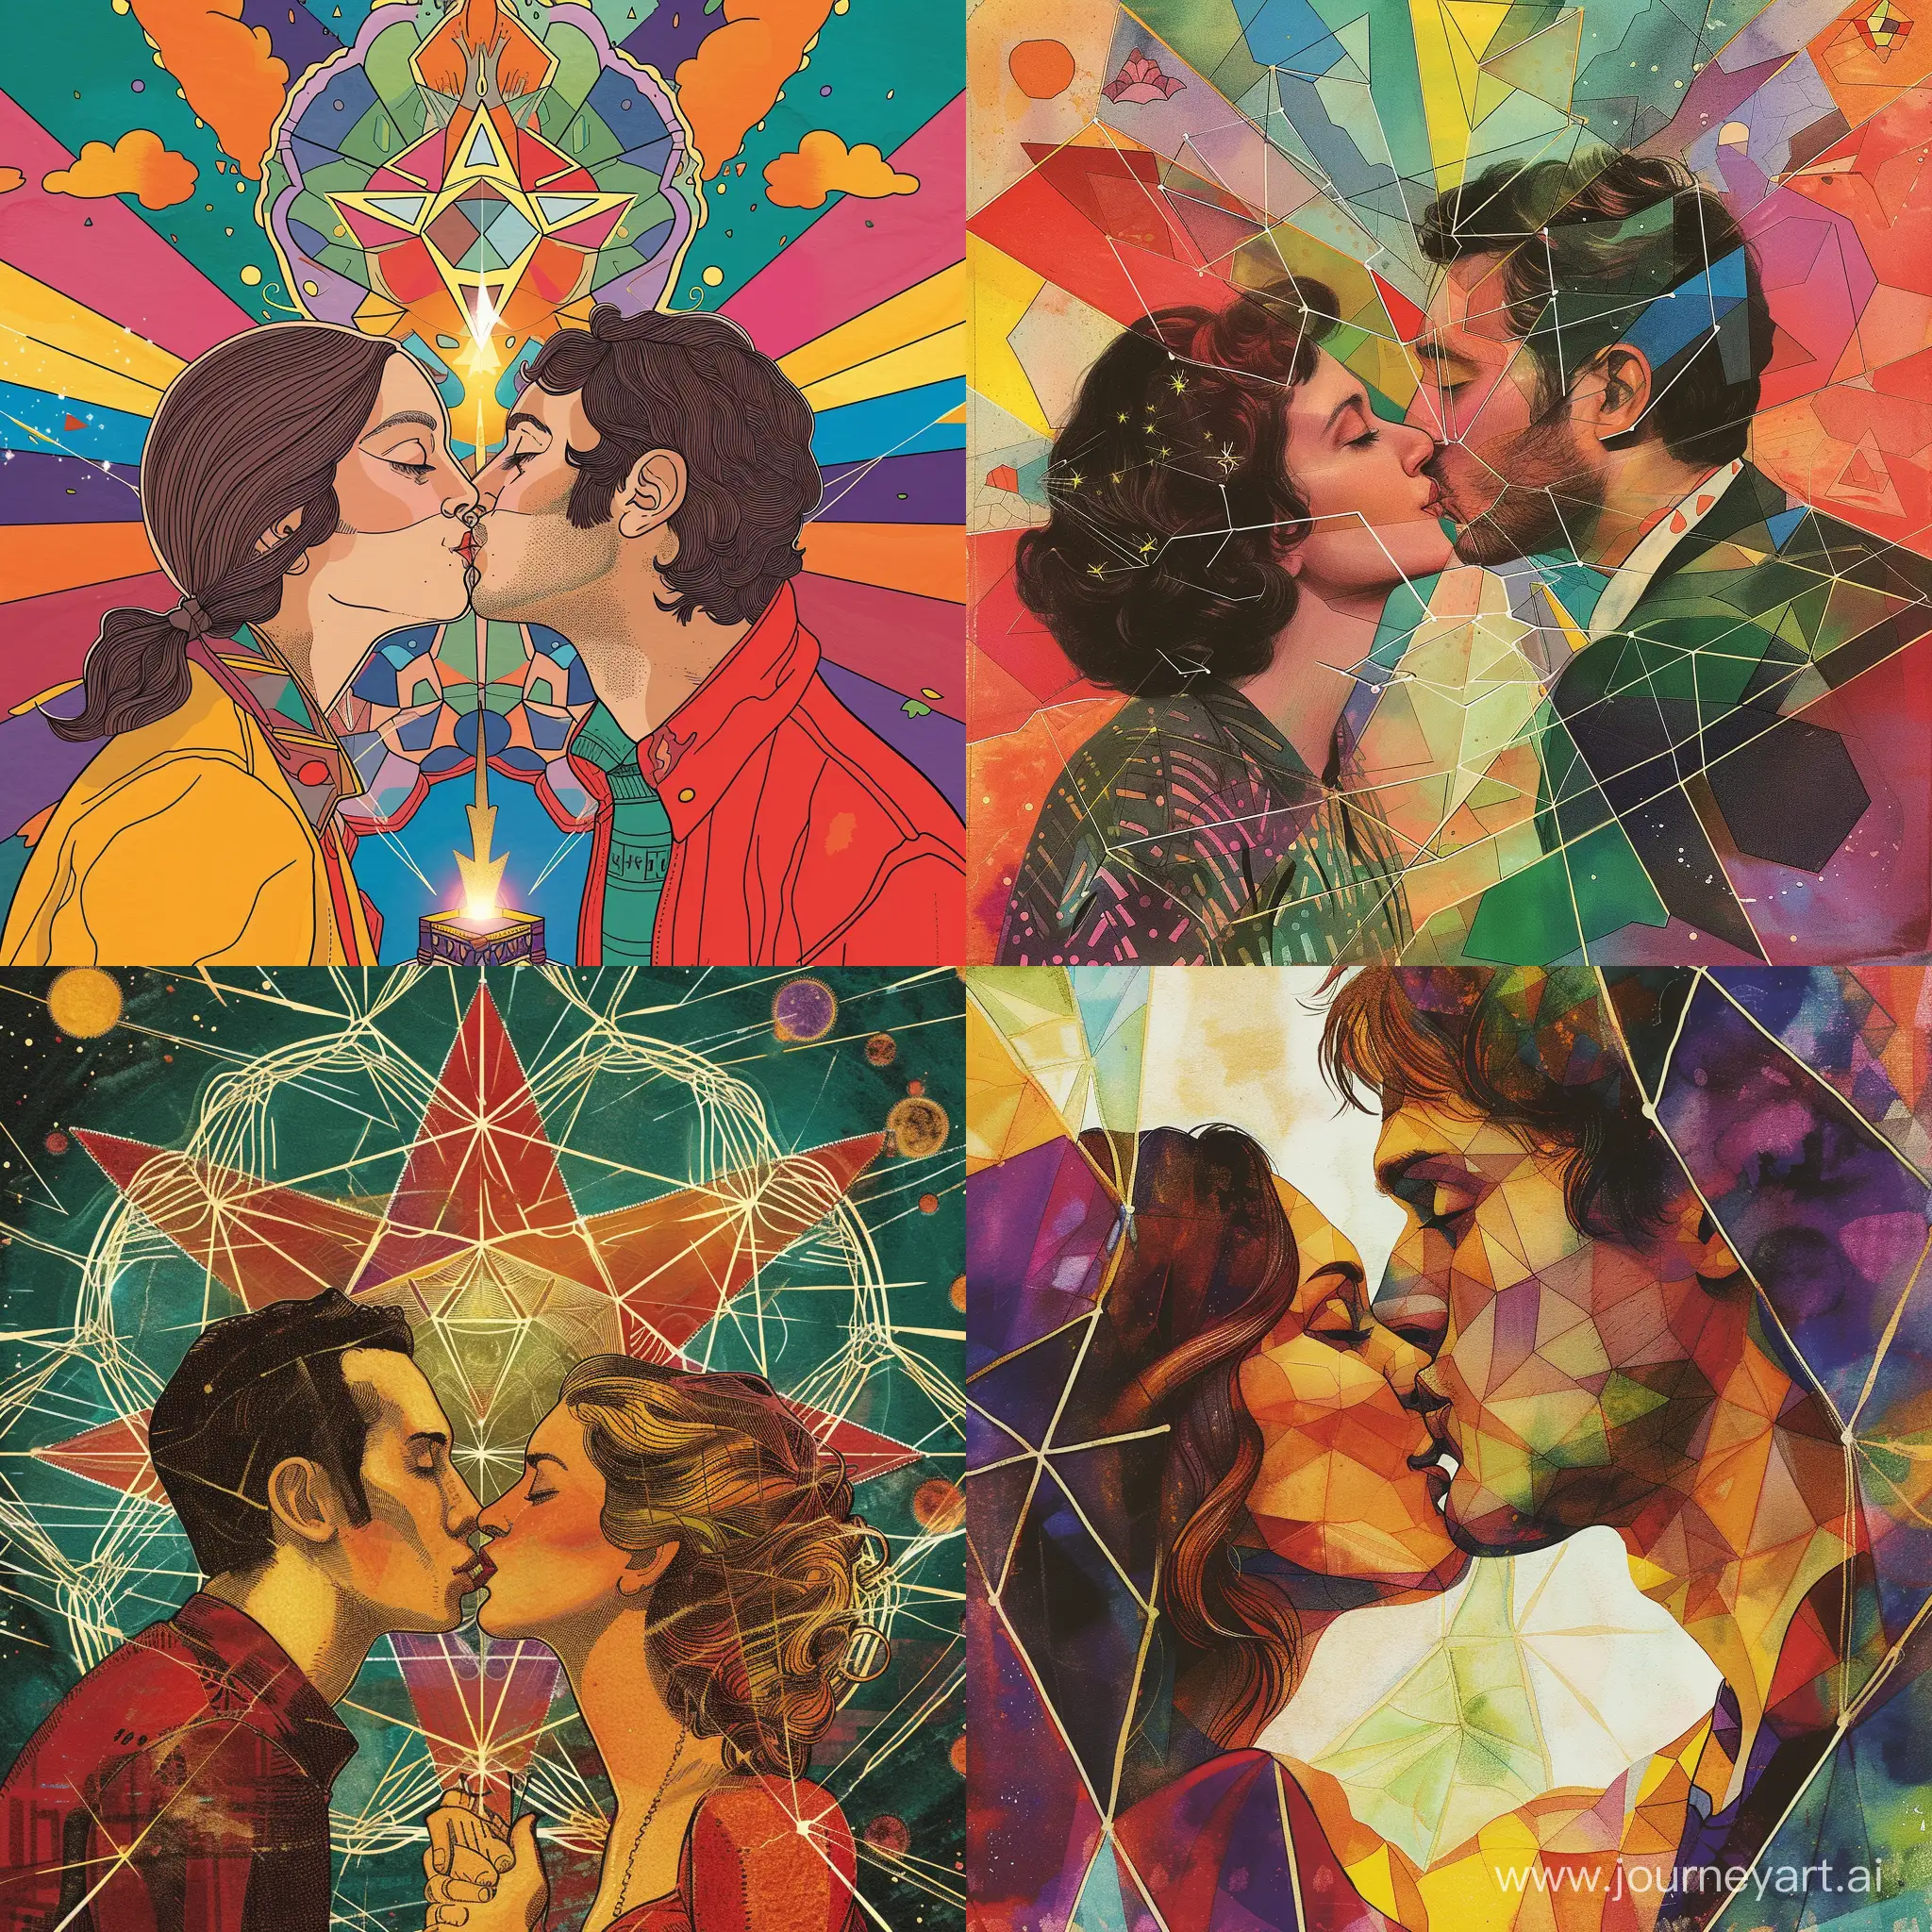 Vibrant-Geometric-Kiss-Illustration-of-a-Couple-Embracing-with-Psychomagic-and-Tarot-Elements